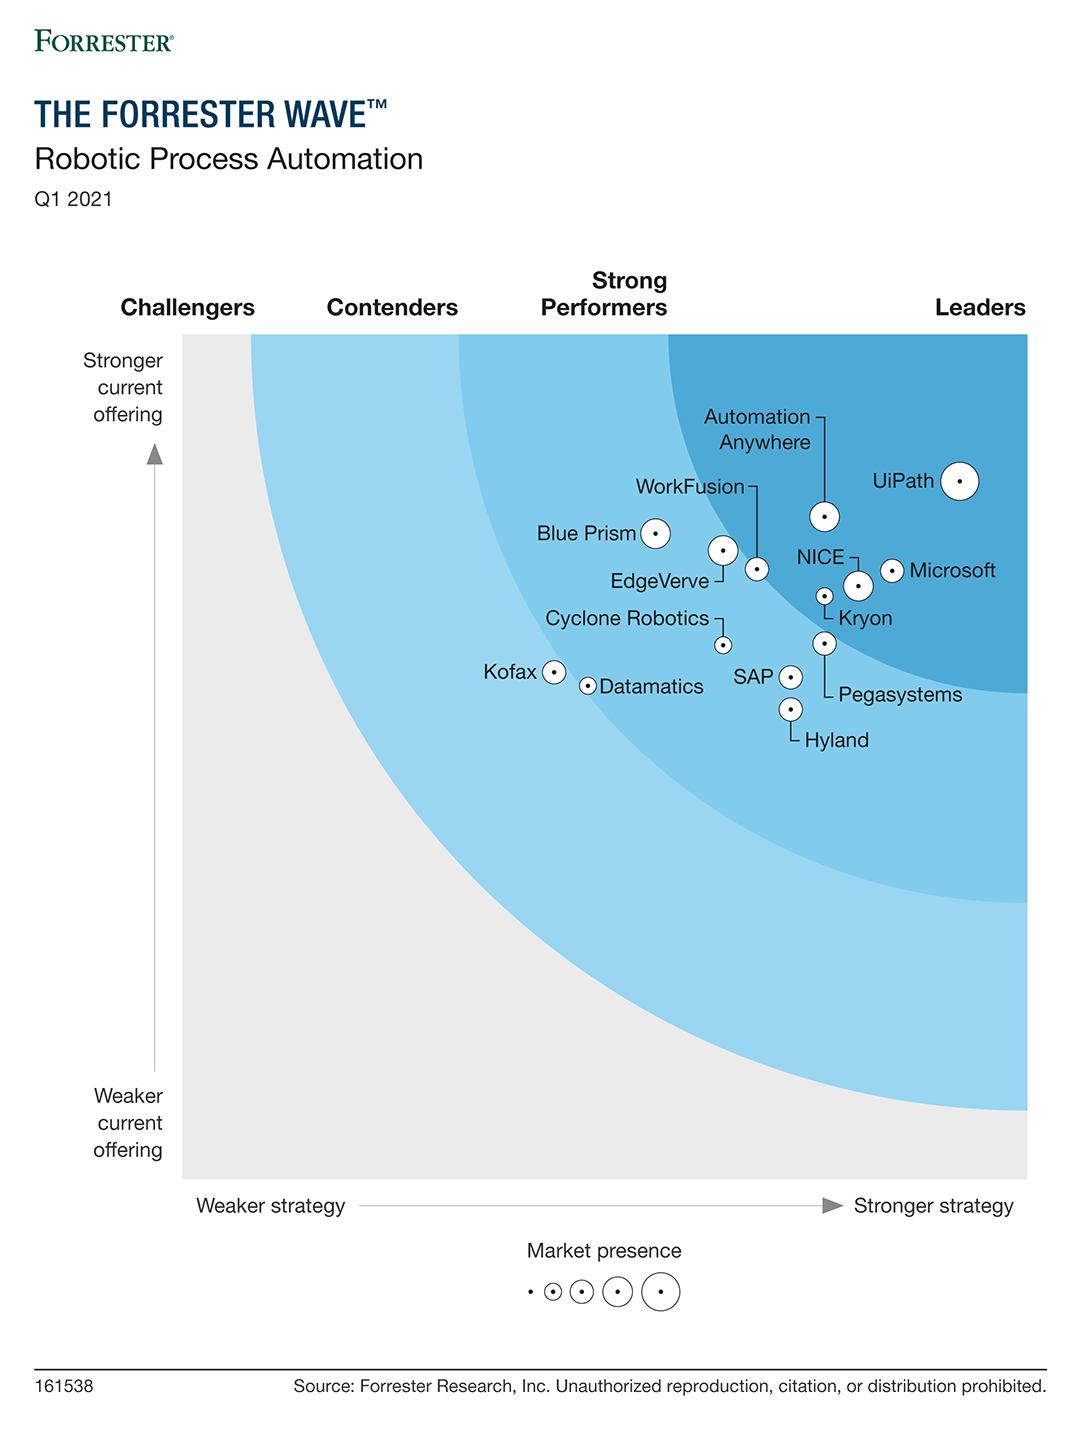  UiPath’s ranking according to Forrester Wave: RPA, Q1 2021